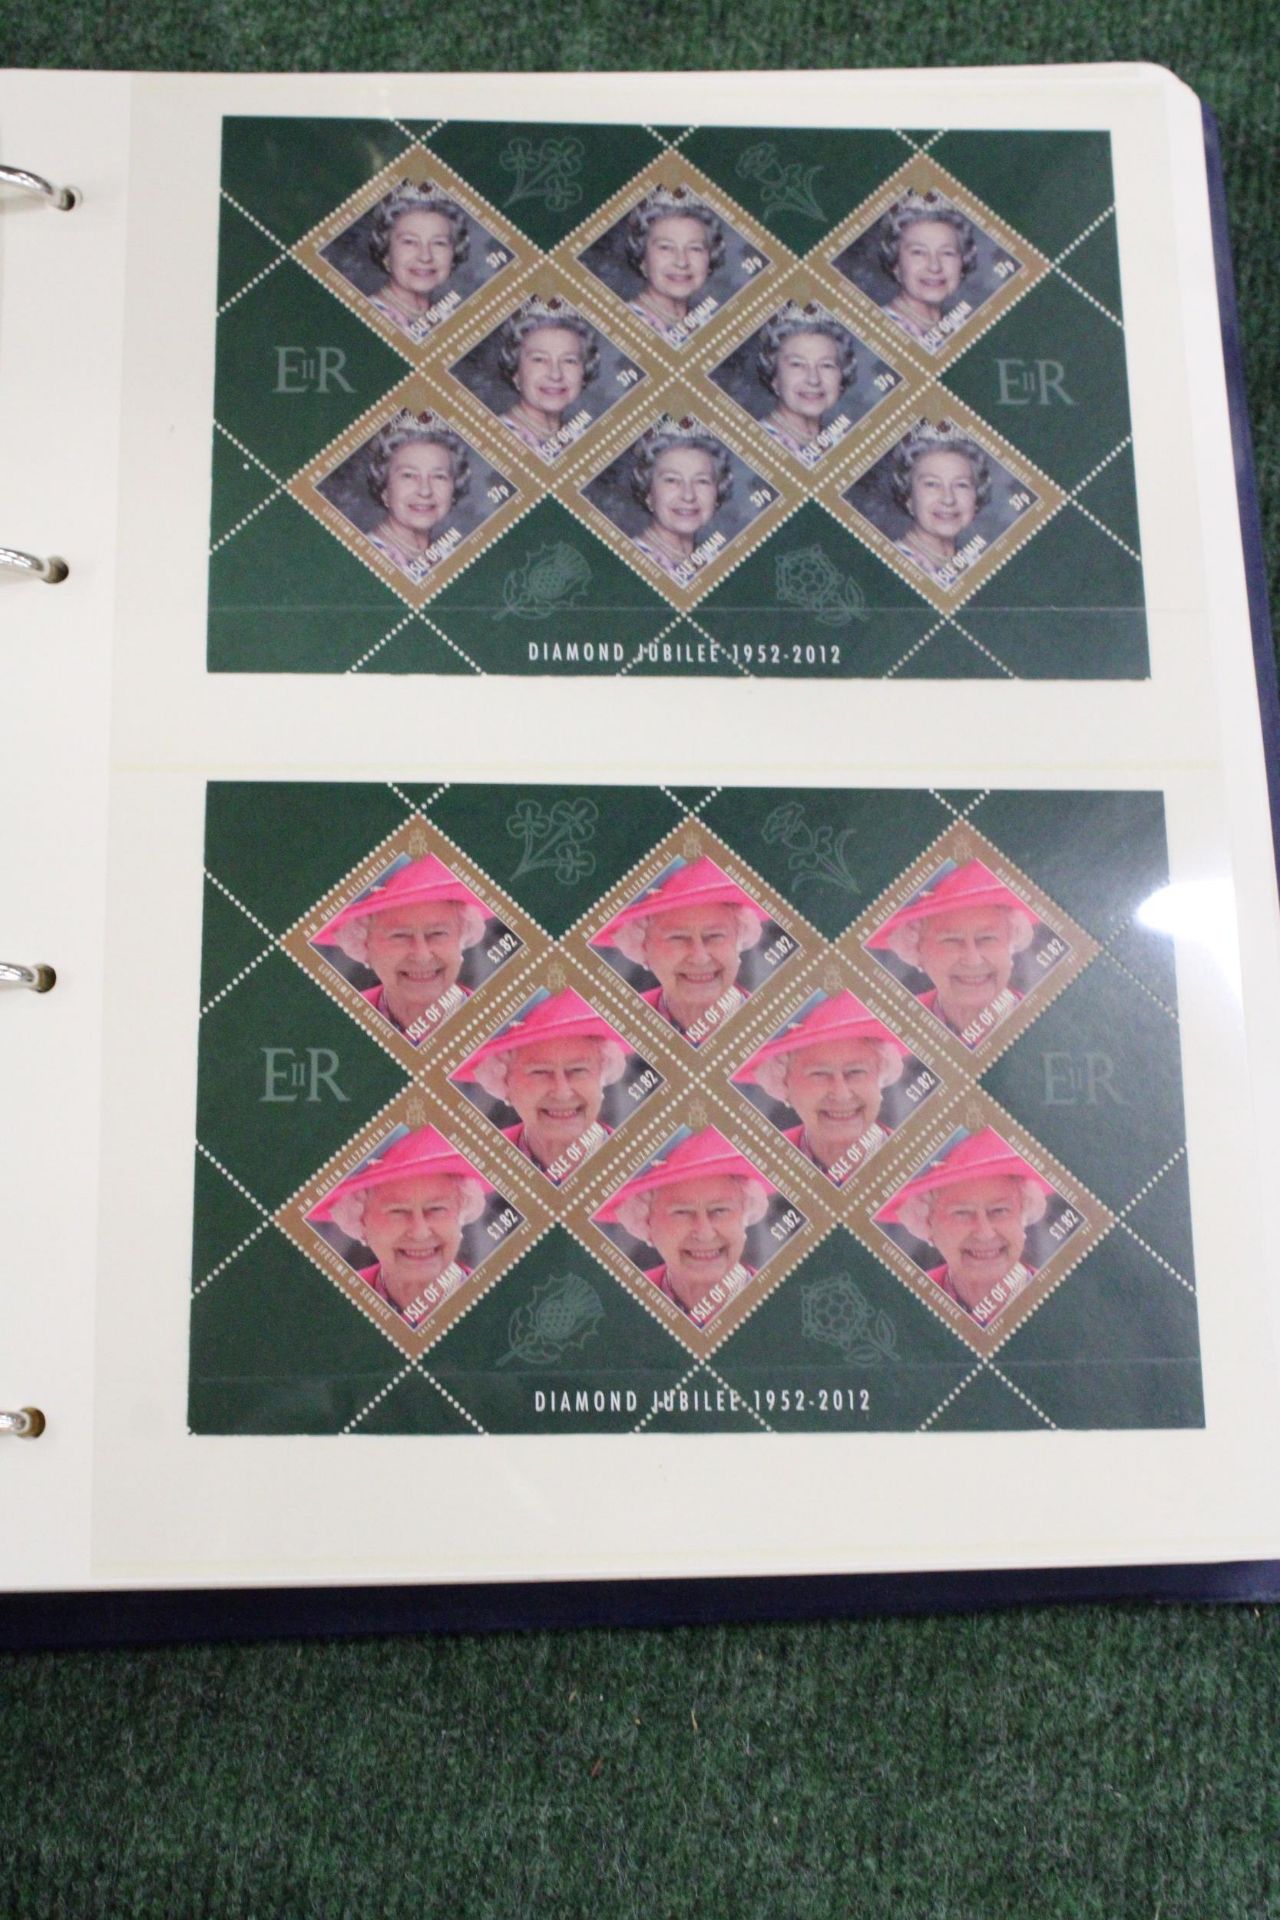 AN ALBUM CONTAINING QUEEN ELIZABETH 11, DIAMOND JUBILEE STAMPS - Image 3 of 6